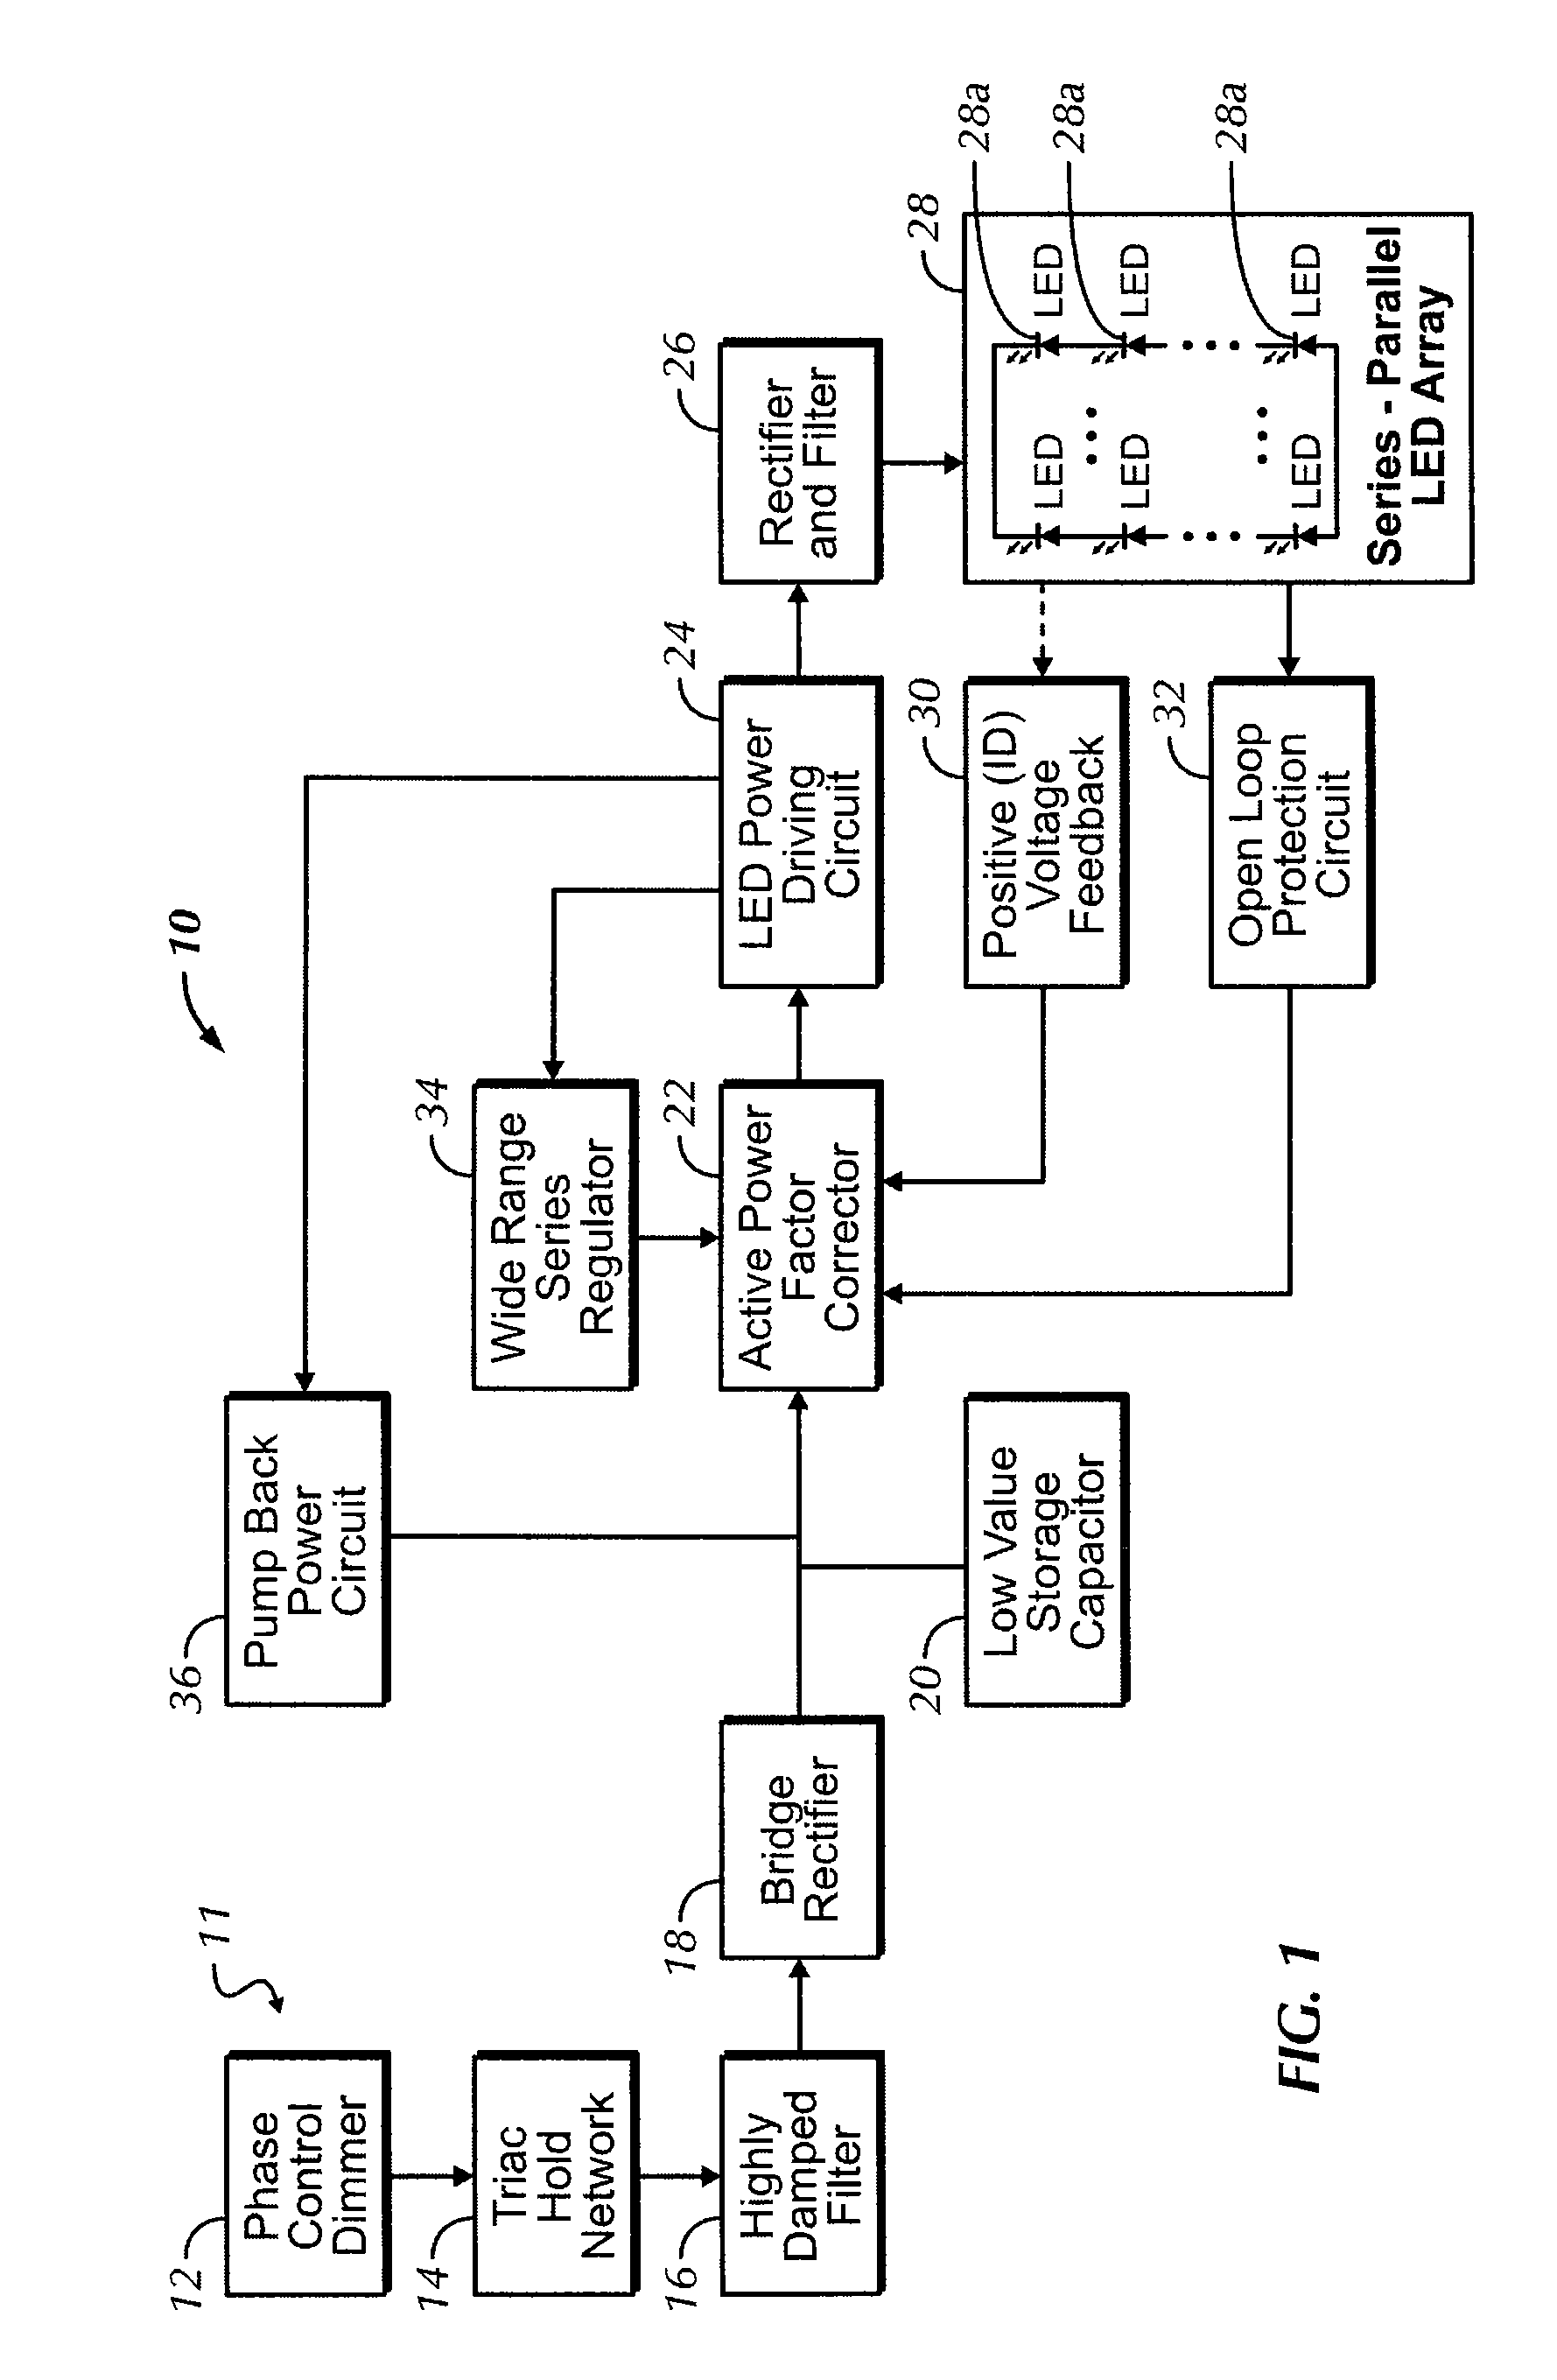 Method and circuit for controlling an LED